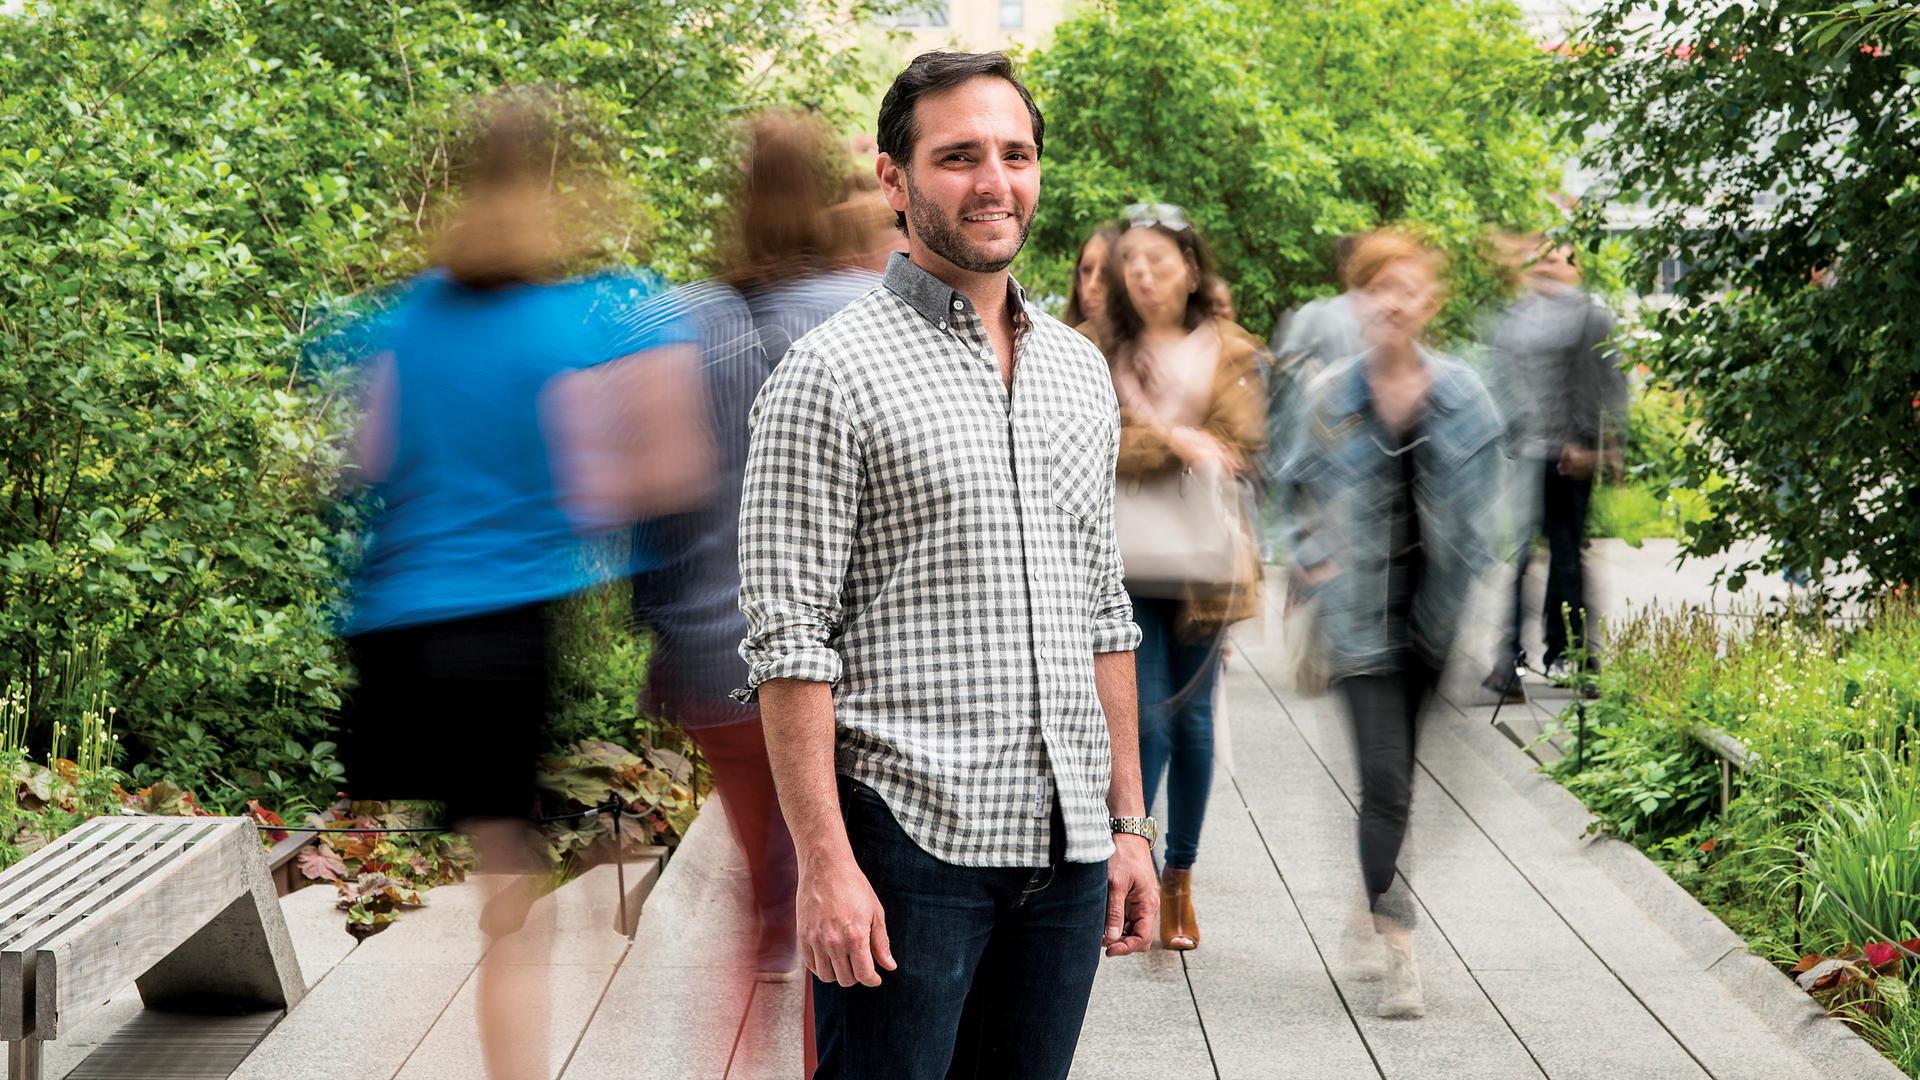 Smiling Young man in front of blurred walking people